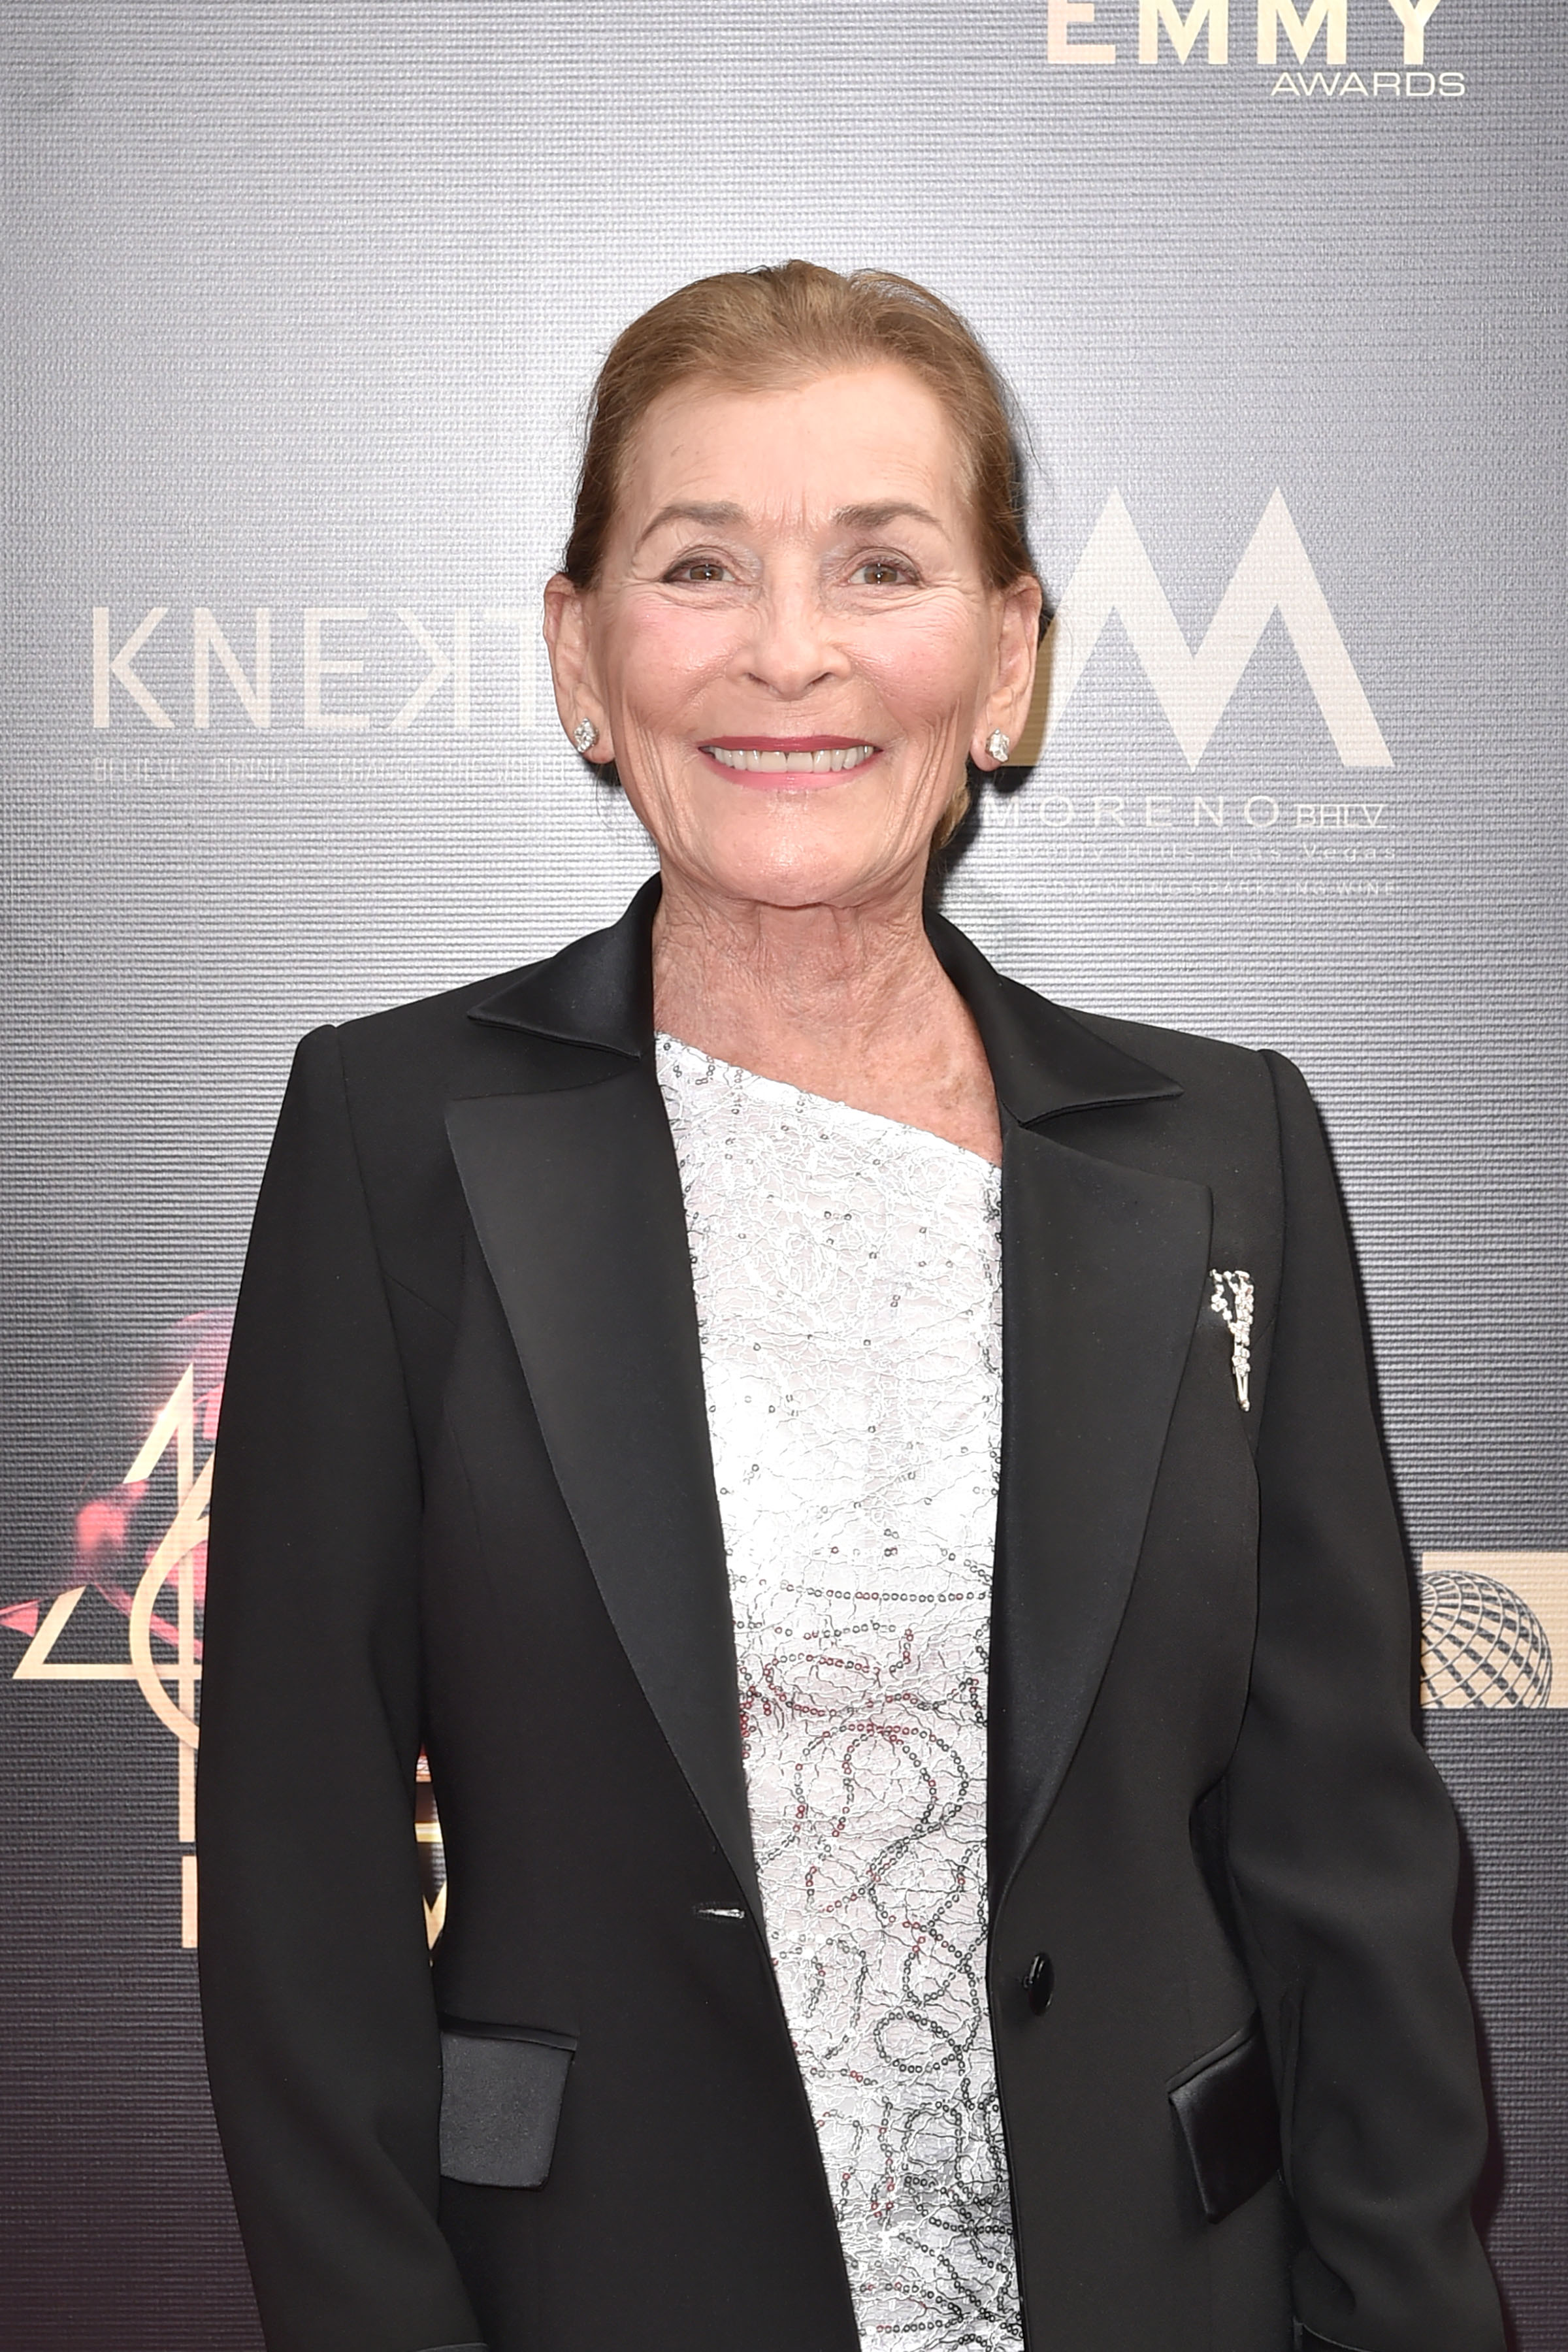 Judy Sheindlin attends the 46th annual Daytime Emmy Awards at Pasadena Civic Center on May 05, 2019 in Pasadena, California. | Source: Getty Images